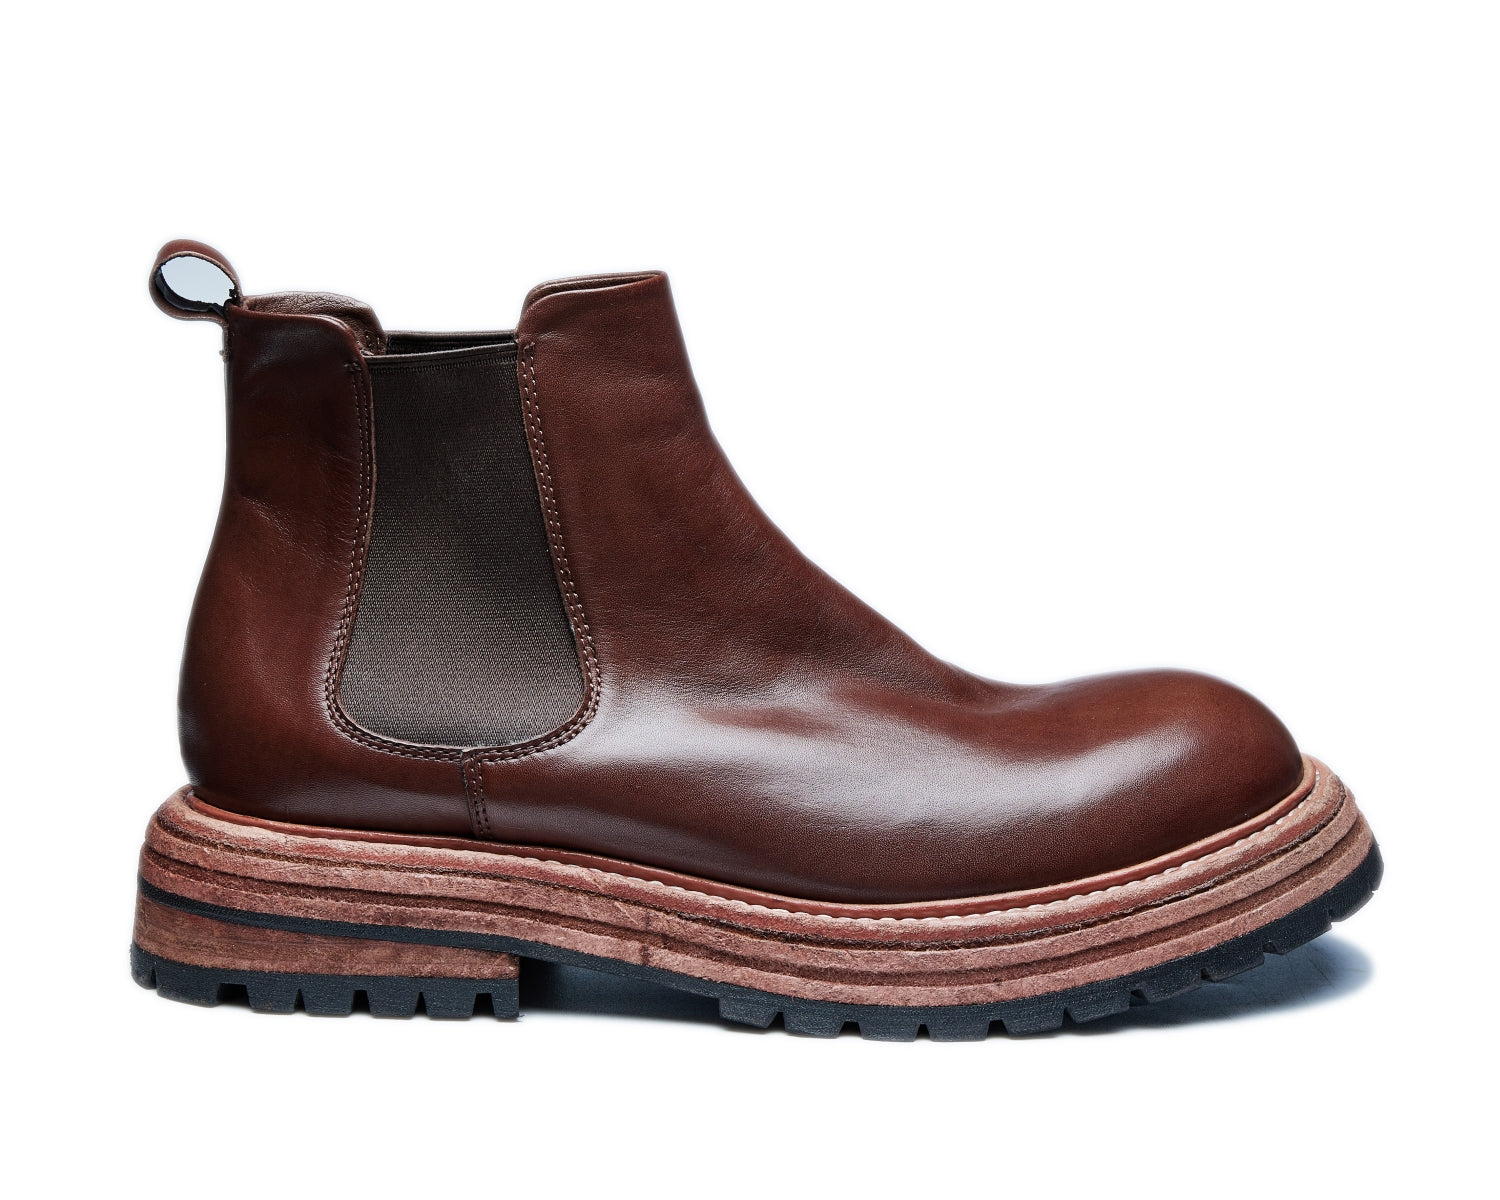 Men's Goodyear welt Chelsea anti-slip boots in various styles including old and skin boots20